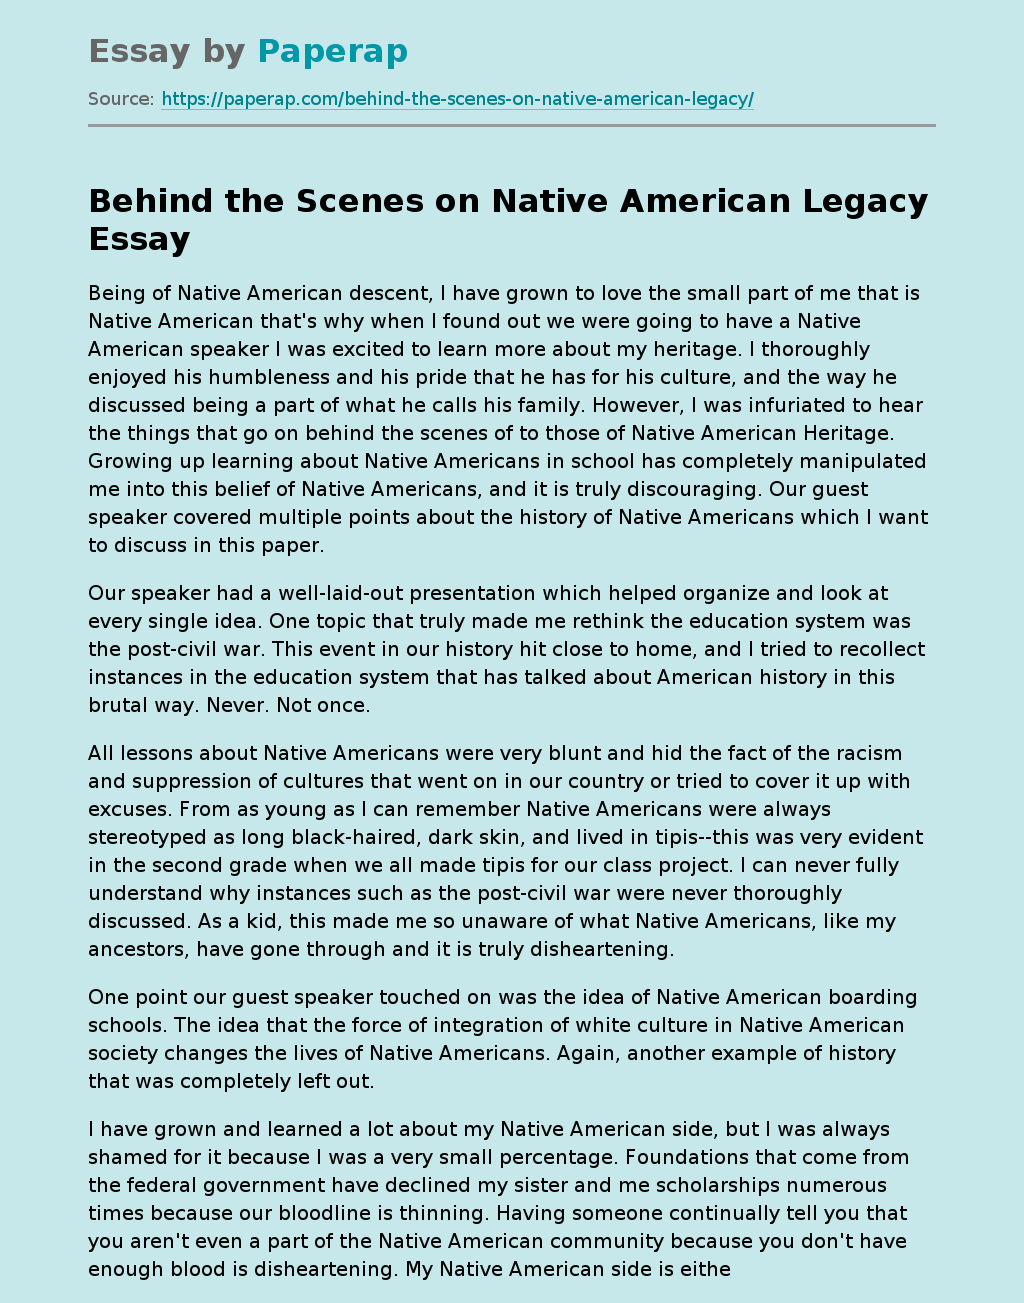 Behind the Scenes on Native American Legacy